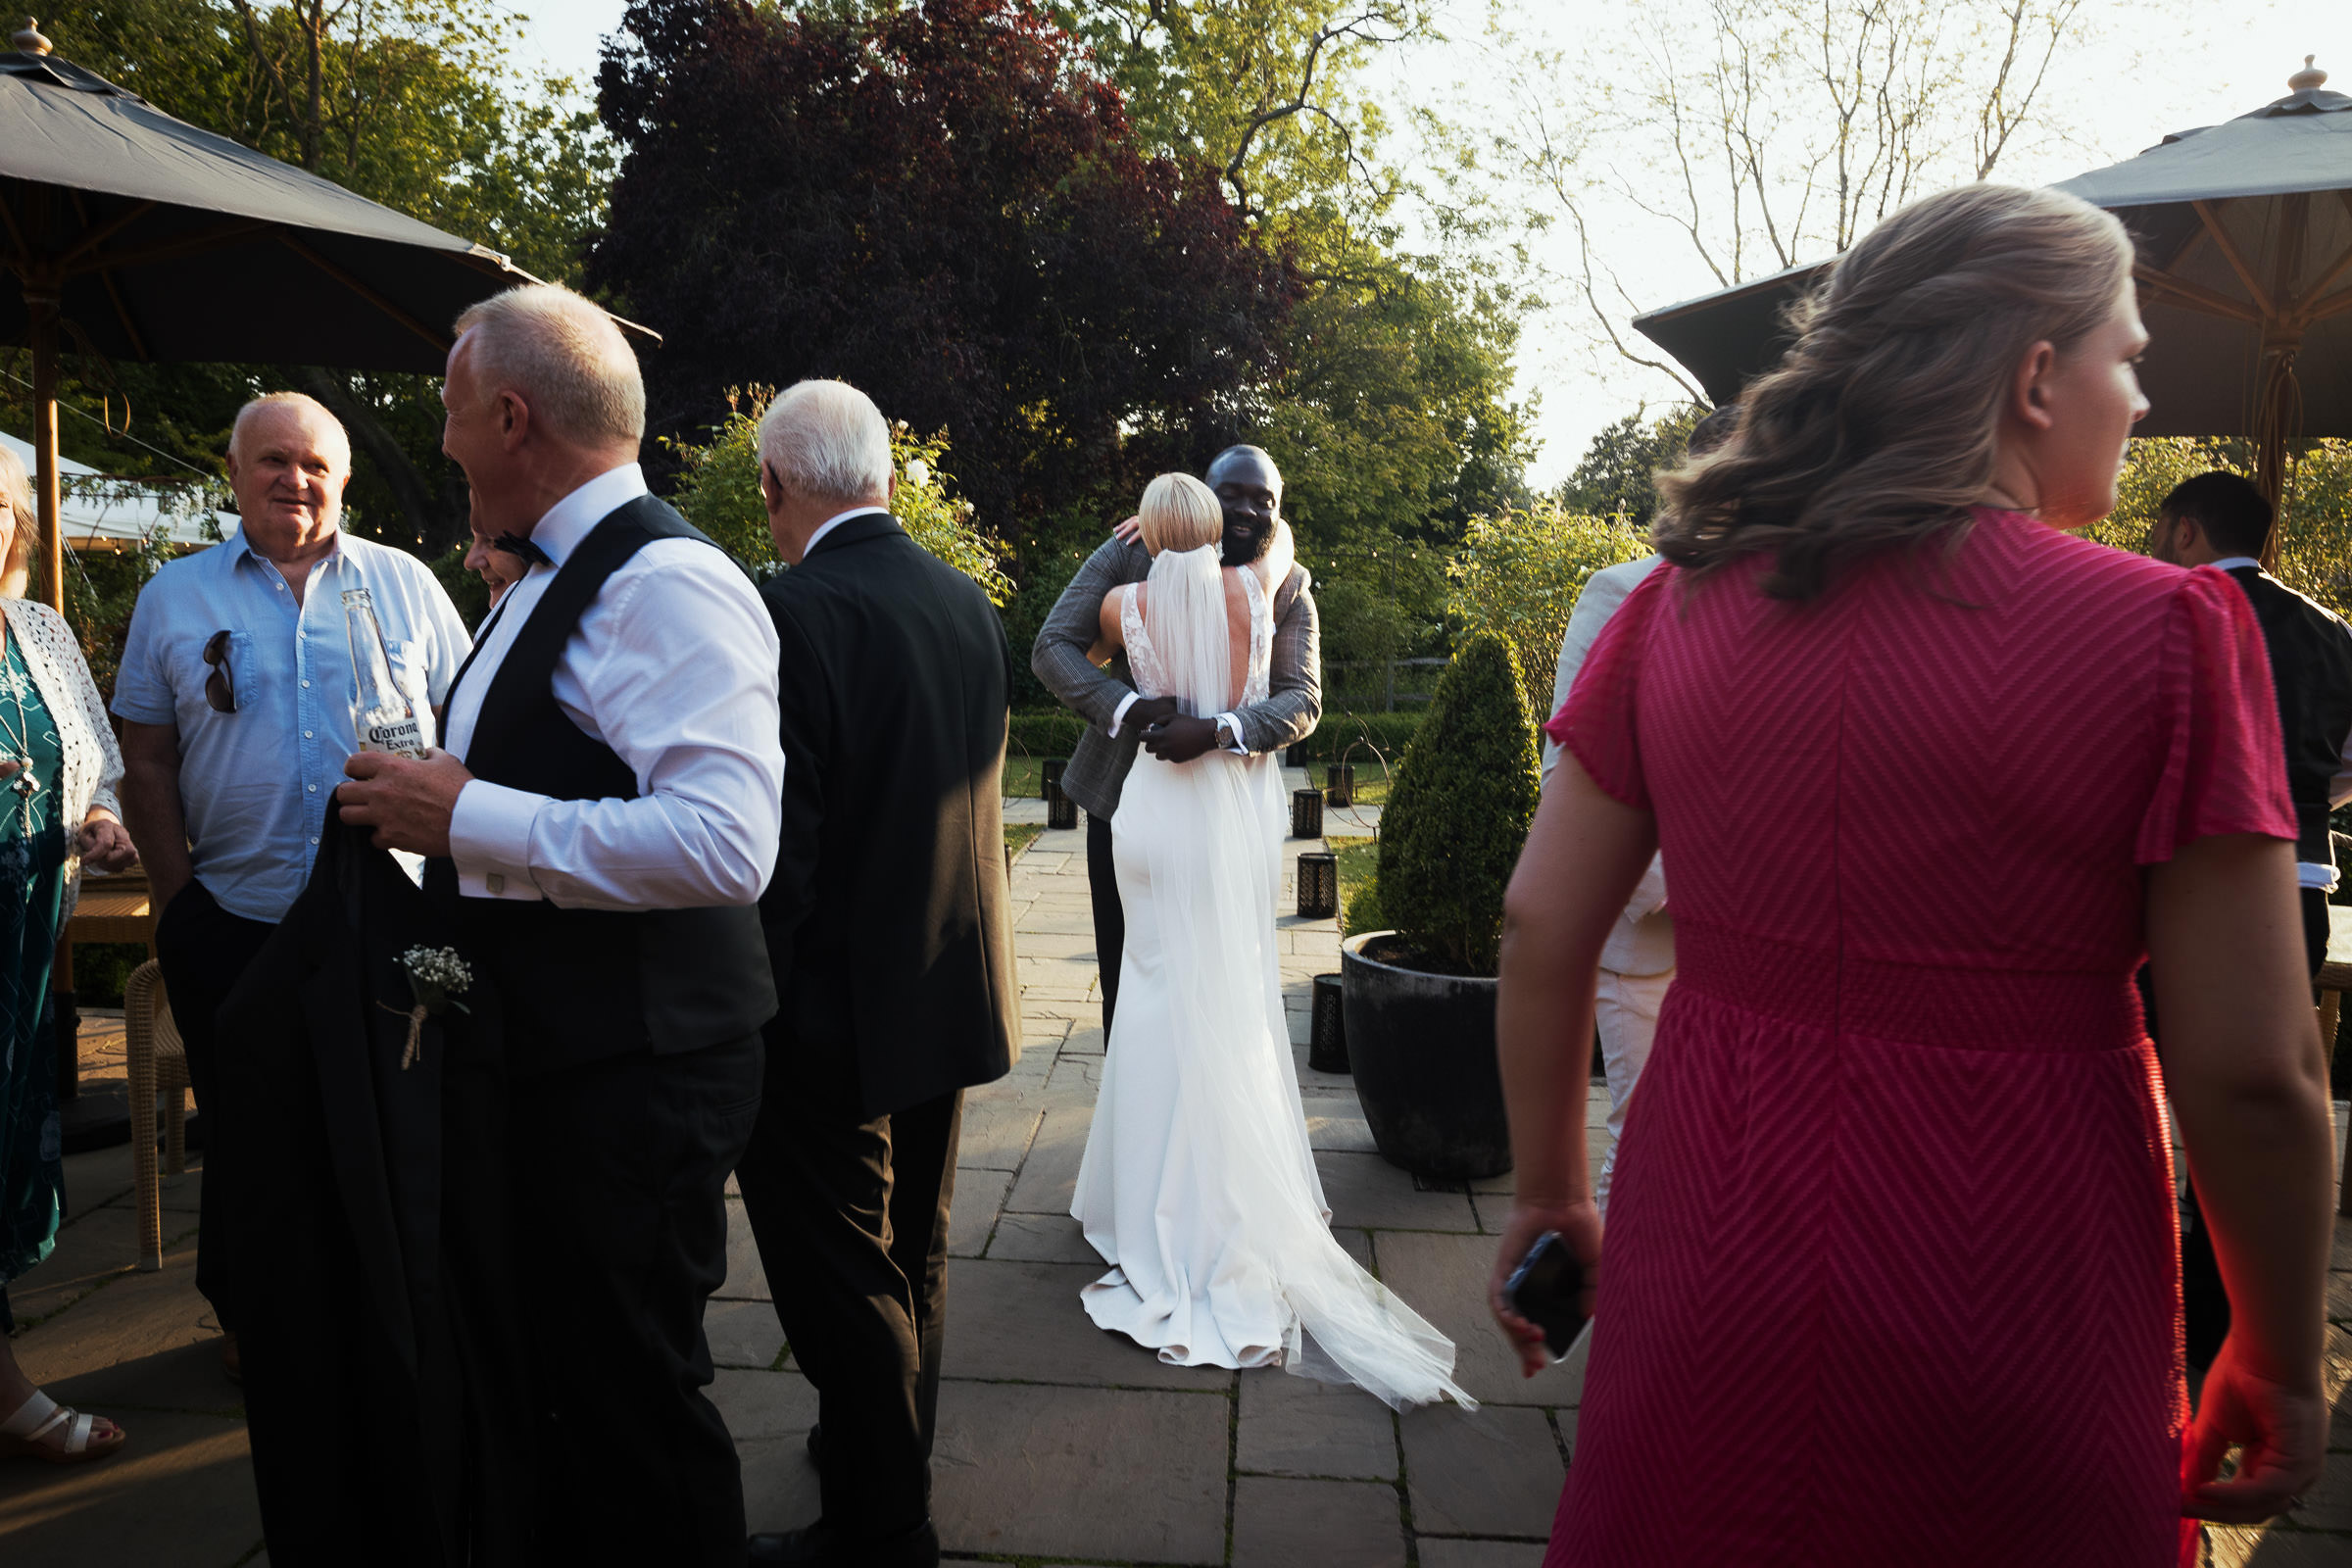 Documentary wedding photography by Tracy Morter at the Essex wedding venue Houchins. The bride is wearing a dress called Jack by Made With Love Bridal from the Halo + Wren bridal shop. Bride is hugging a wedding guest on the terrace in the evening.